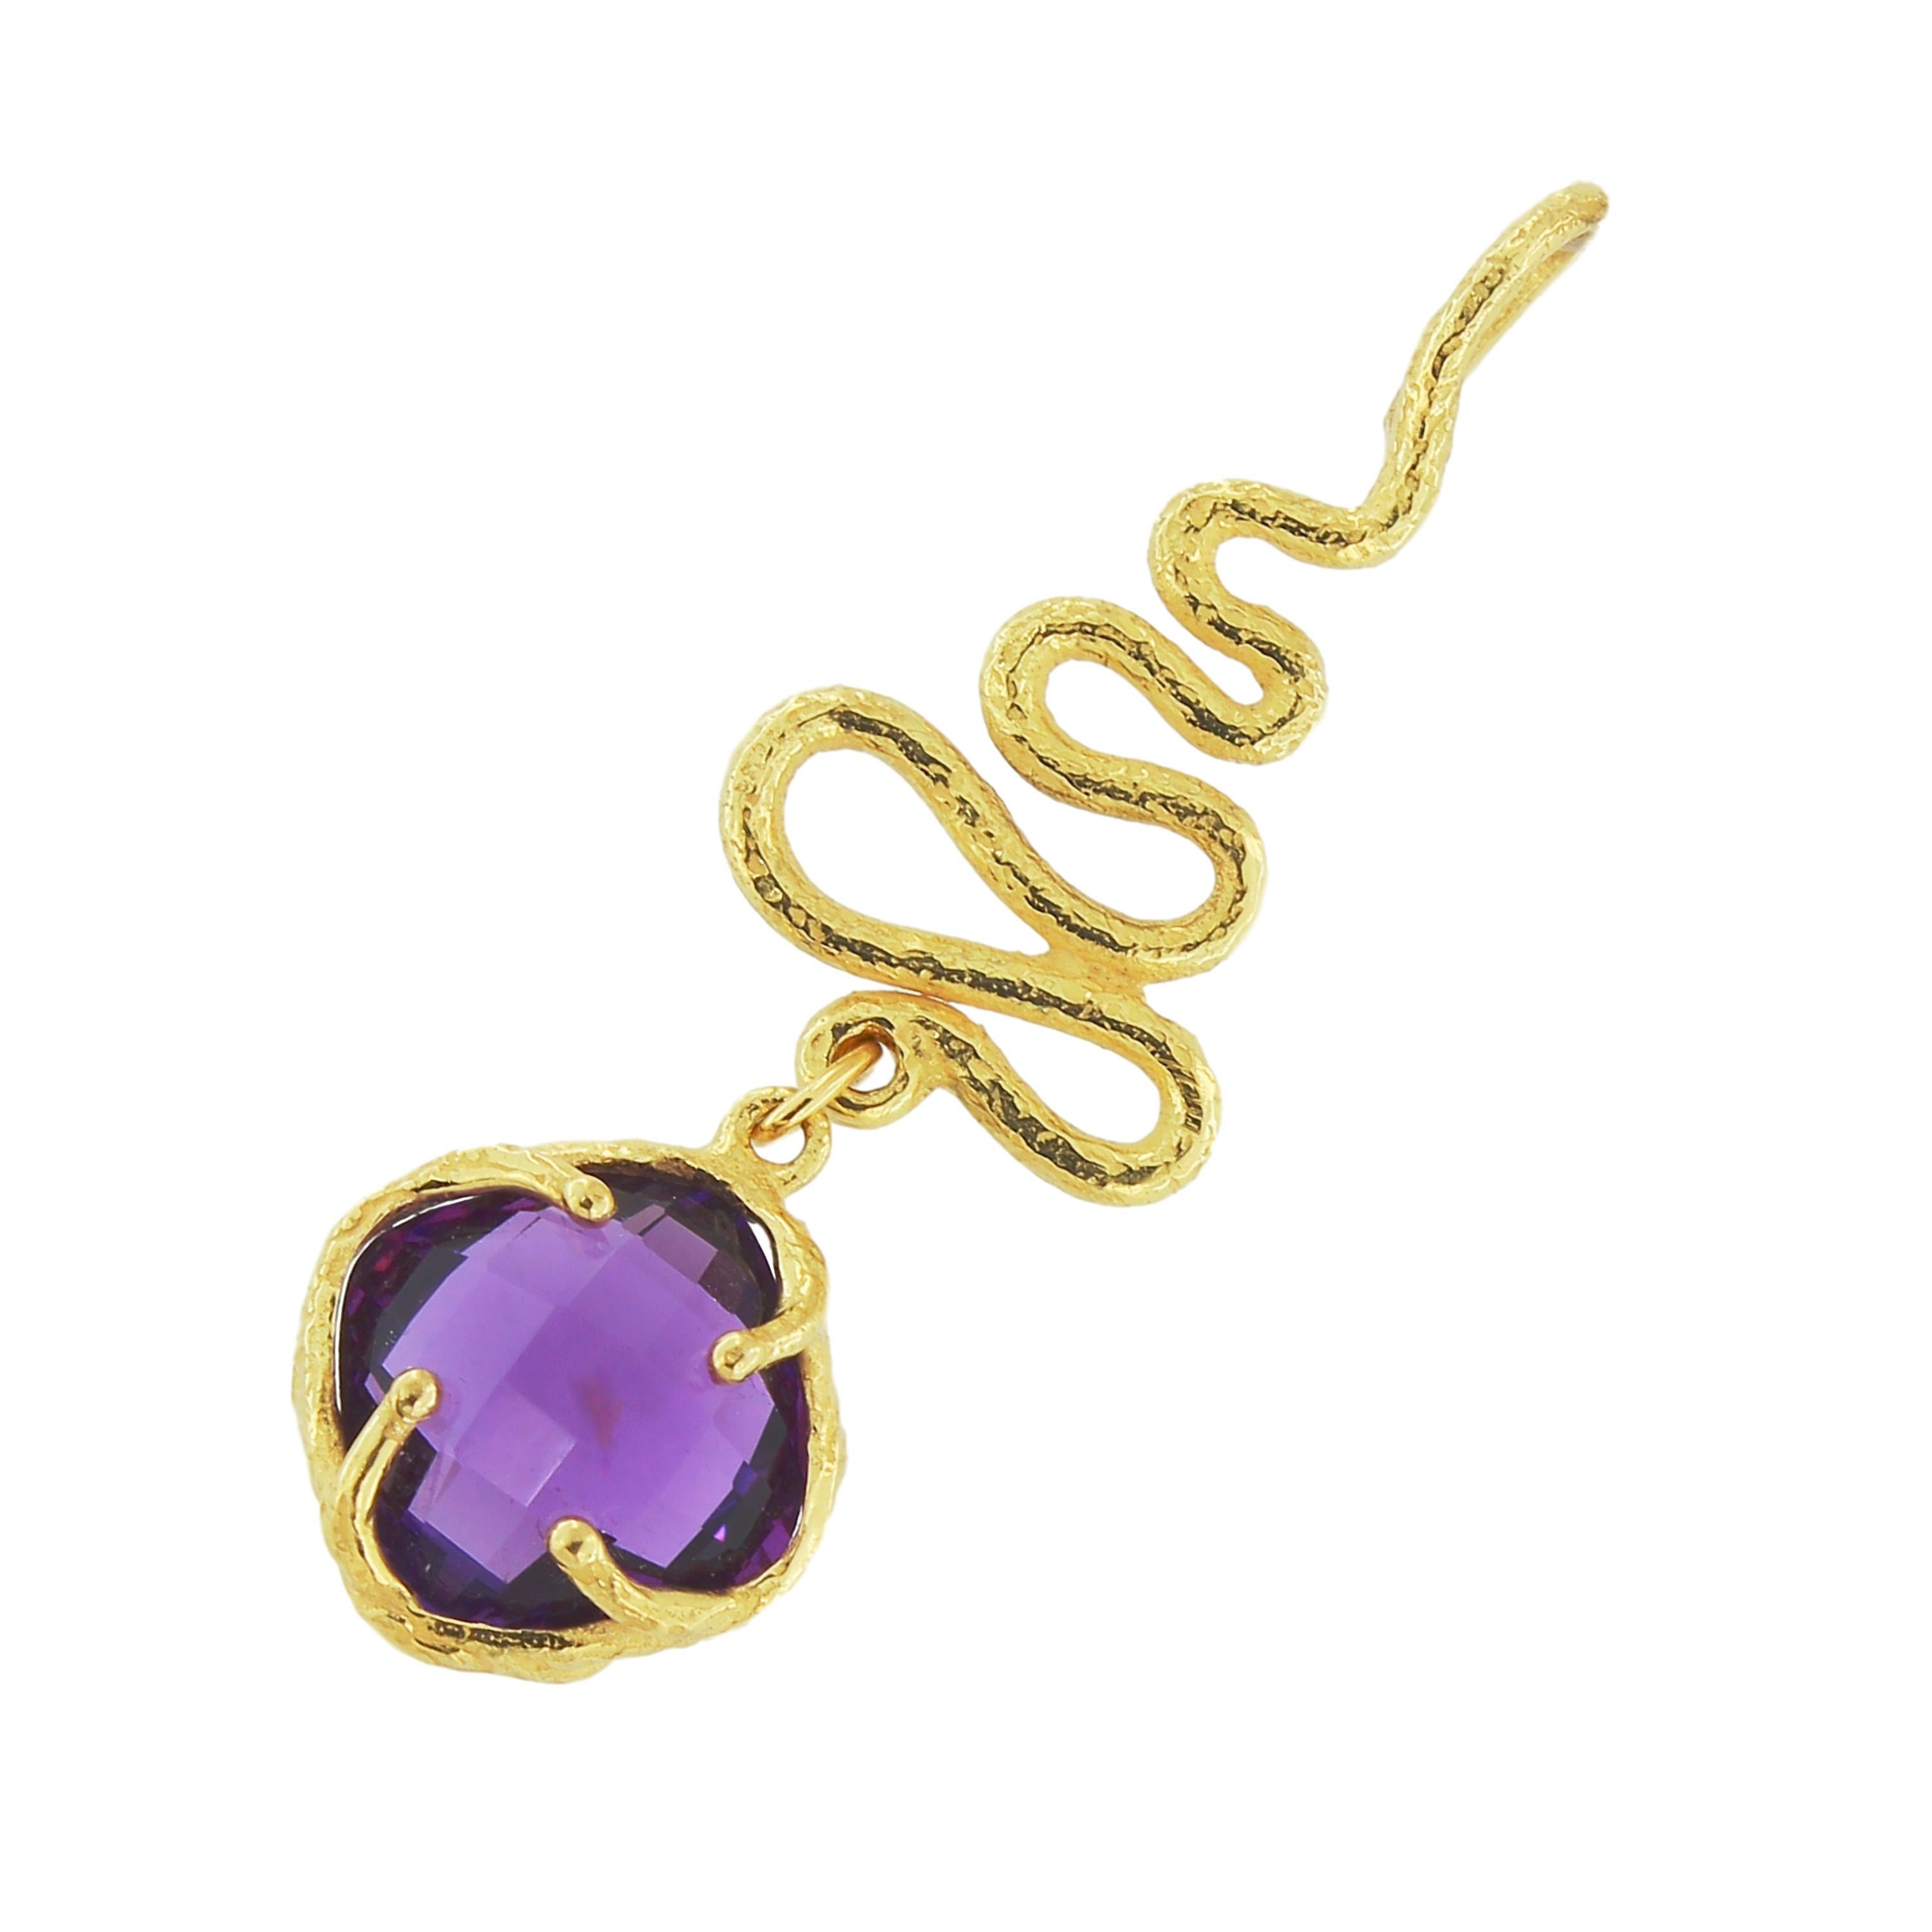 Sacchi Purple Amethyst Gemstone Pendant 18 Karat Satin Yellow Gold In New Condition For Sale In Rome, IT